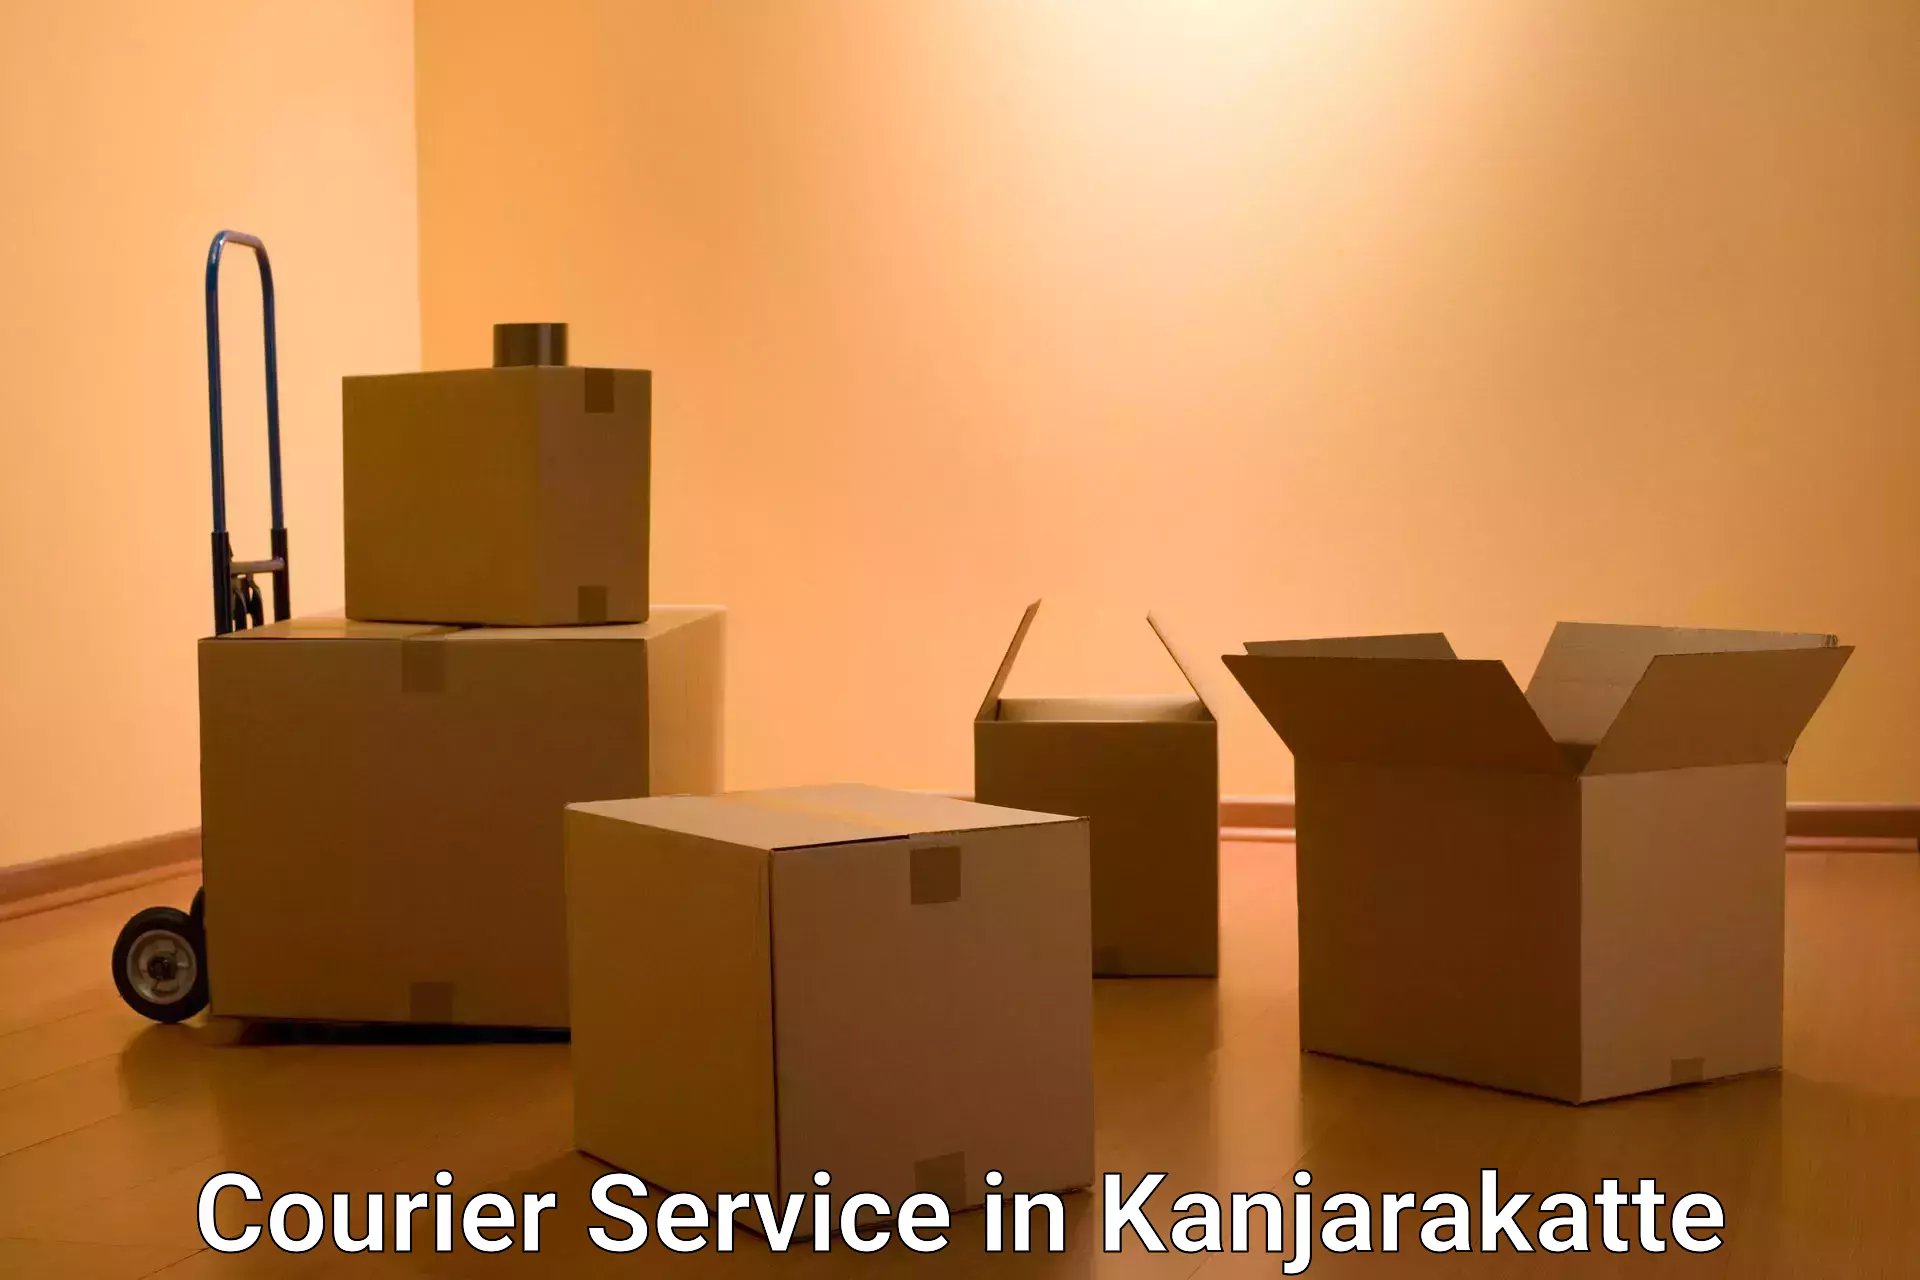 Sustainable delivery practices in Kanjarakatte